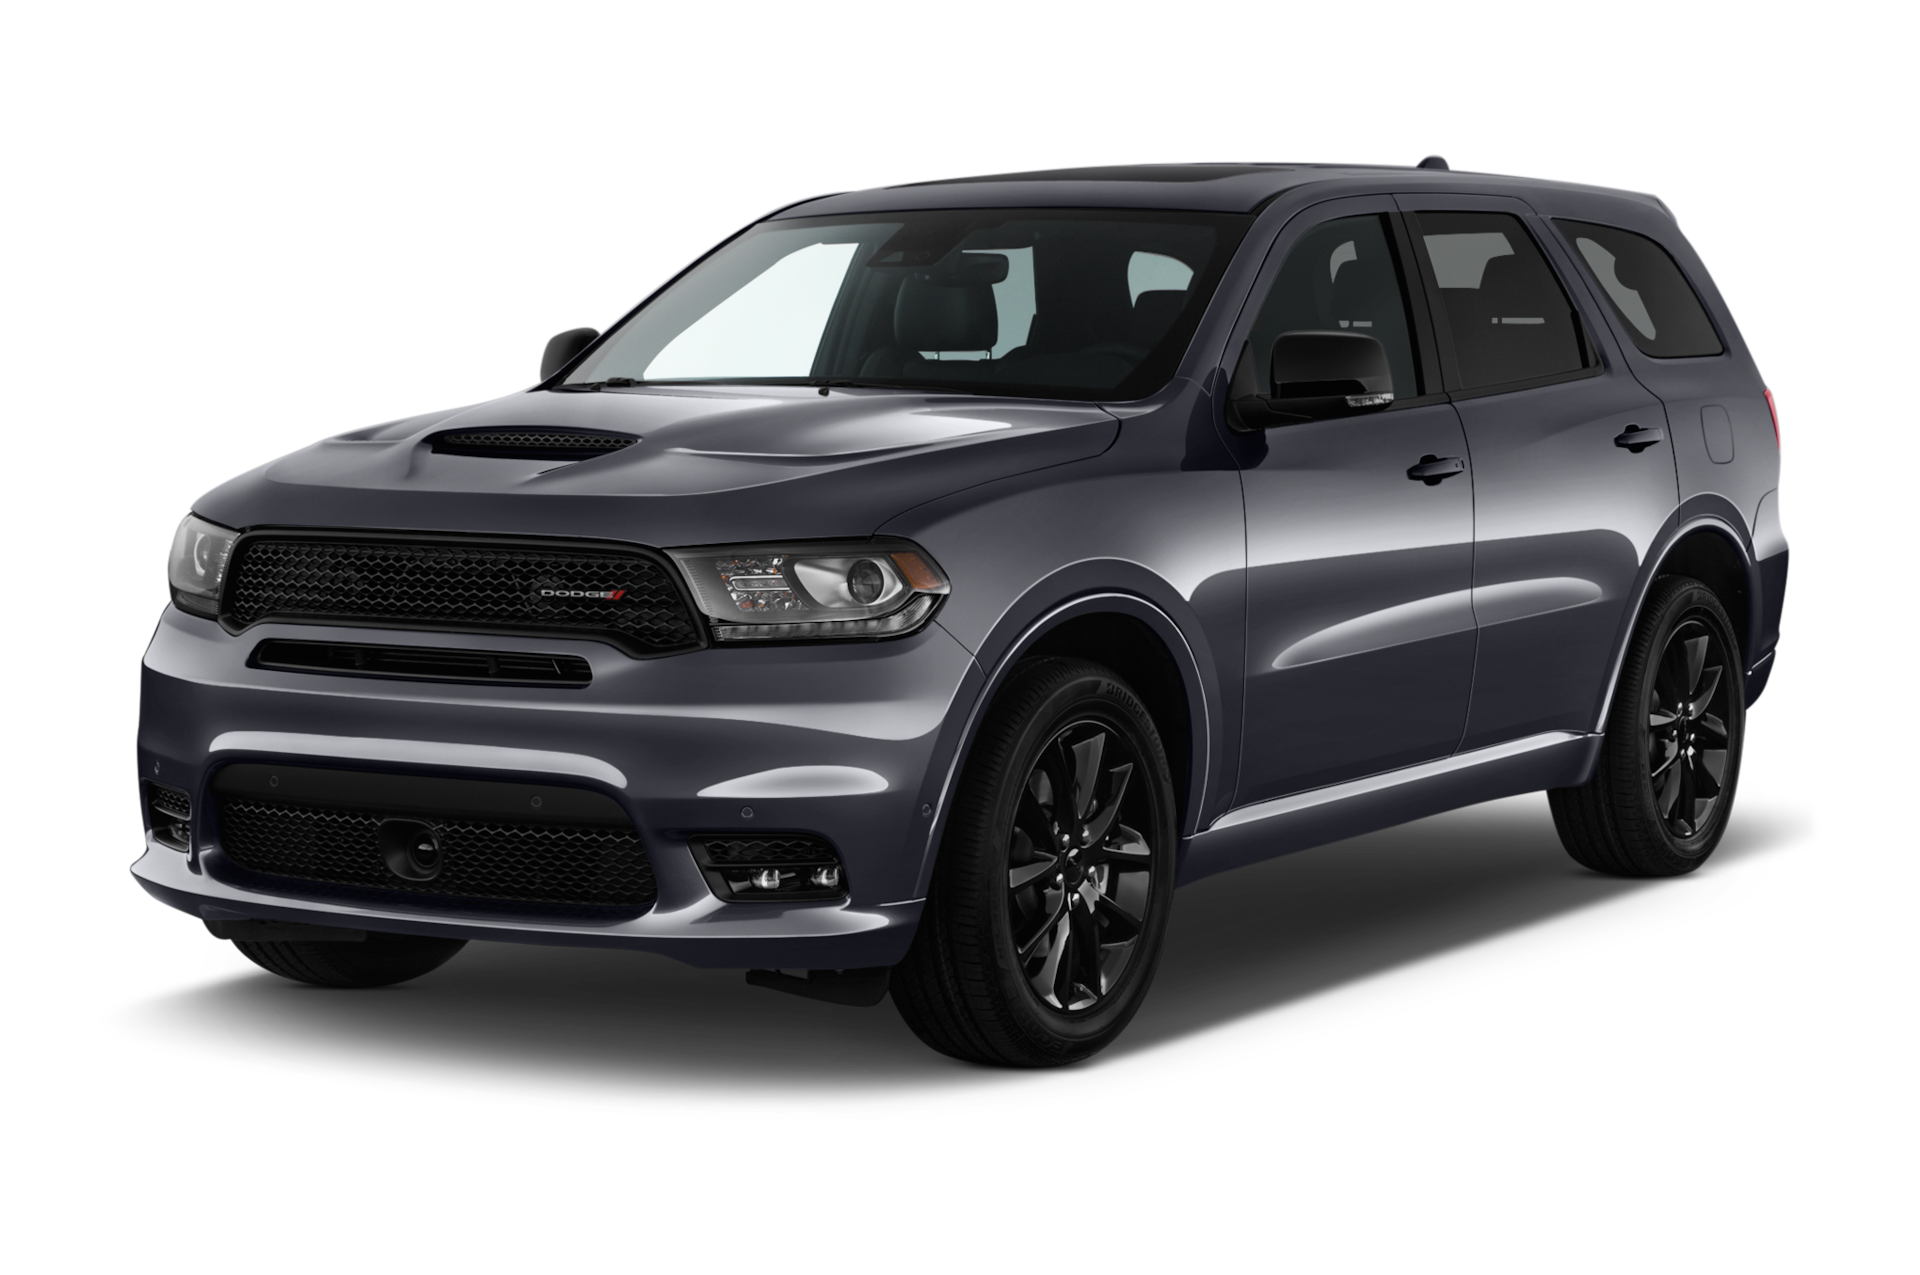 2018 Dodge Durango Prices, Reviews, and Photos - MotorTrend